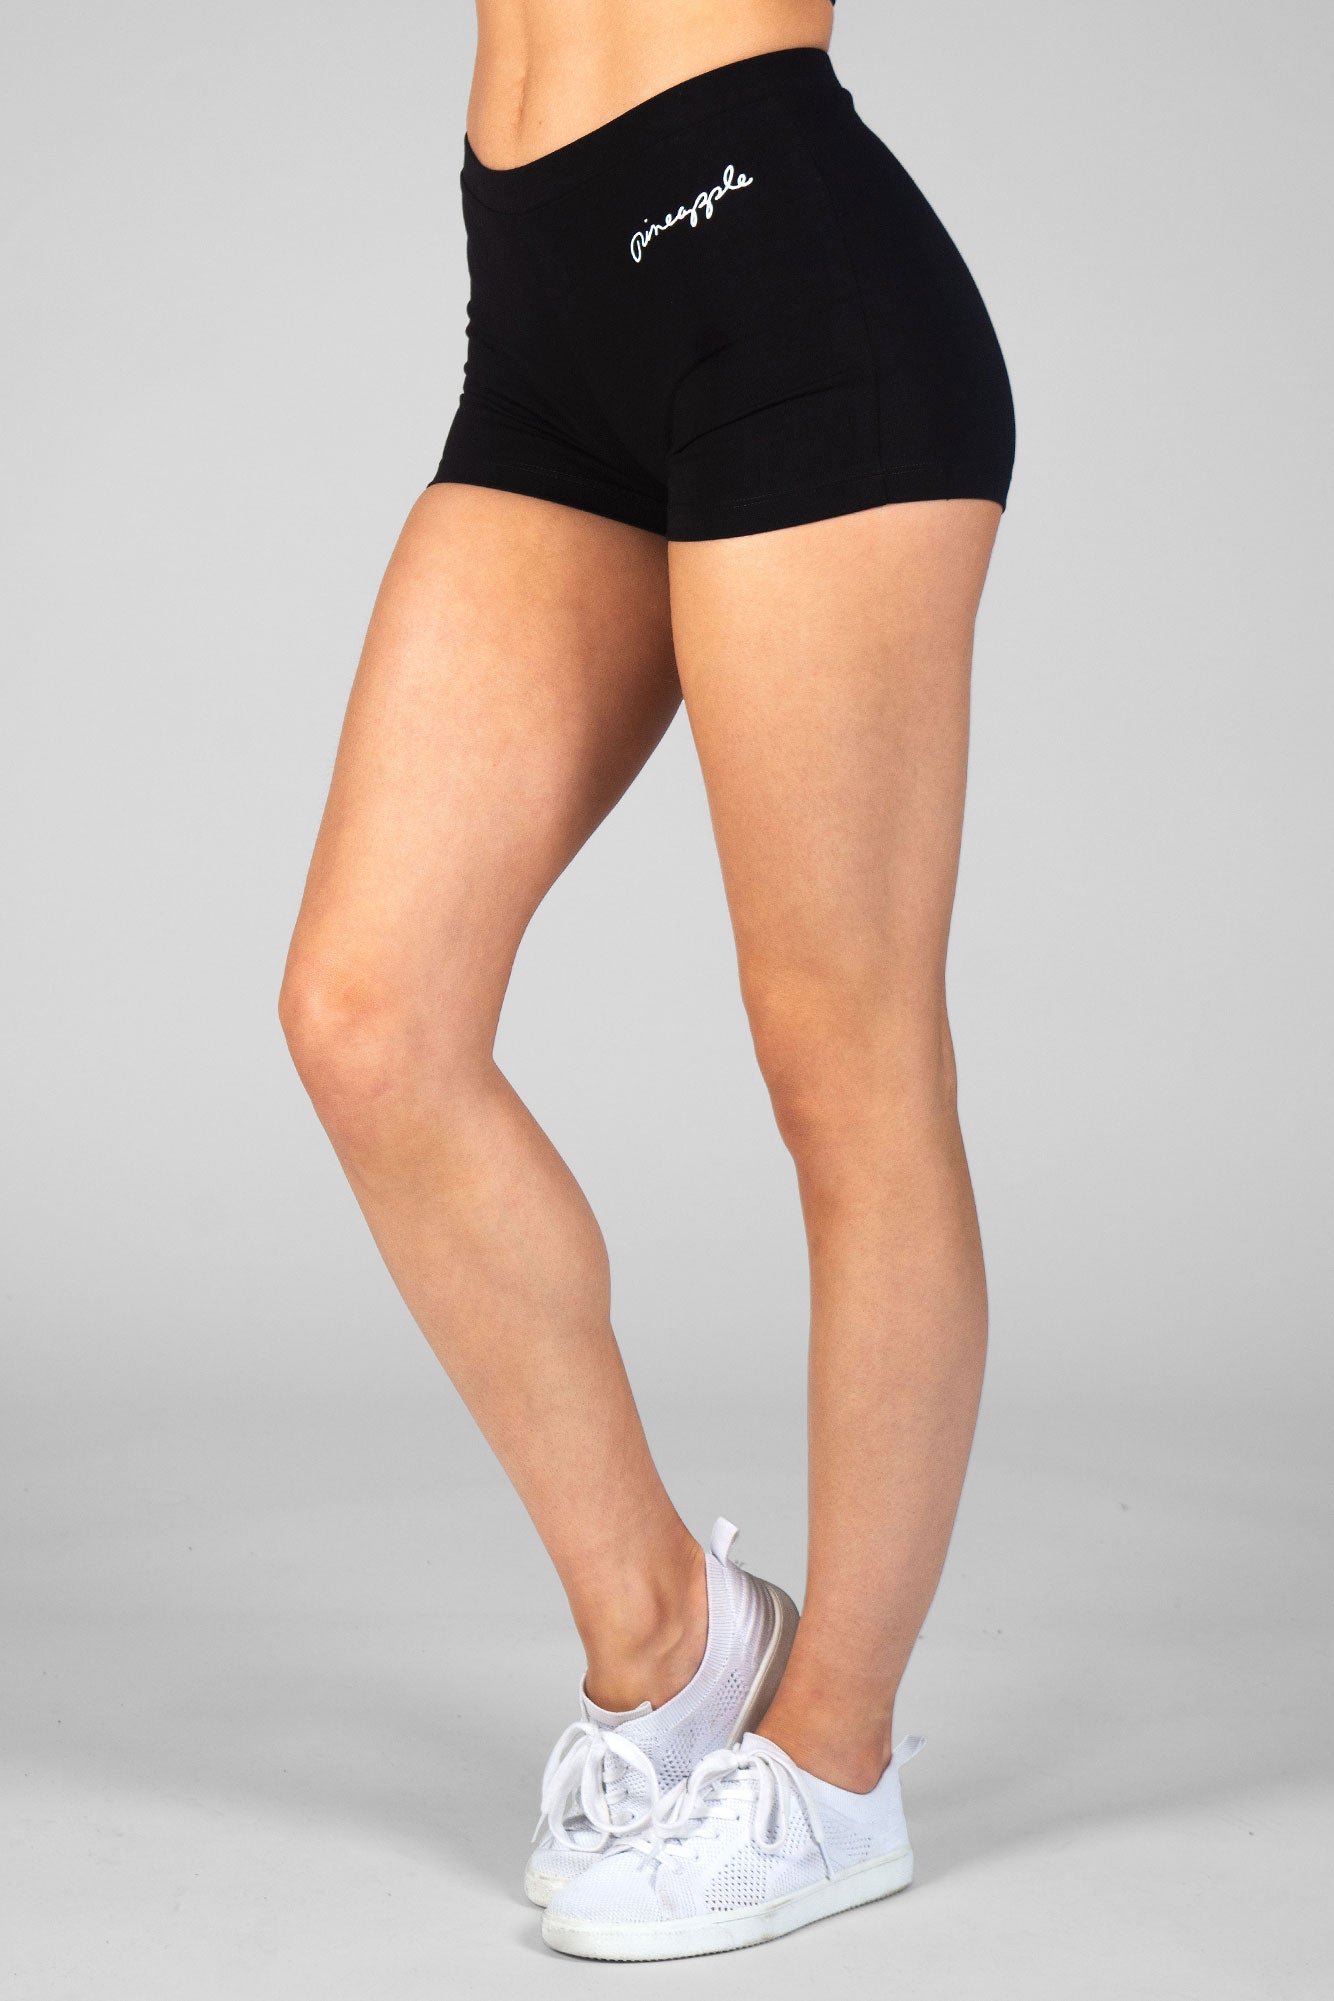 Buy online Printed Hot Pants Short from Skirts  Shorts for Women by Quinoa  for 479 at 60 off  2023 Limeroadcom